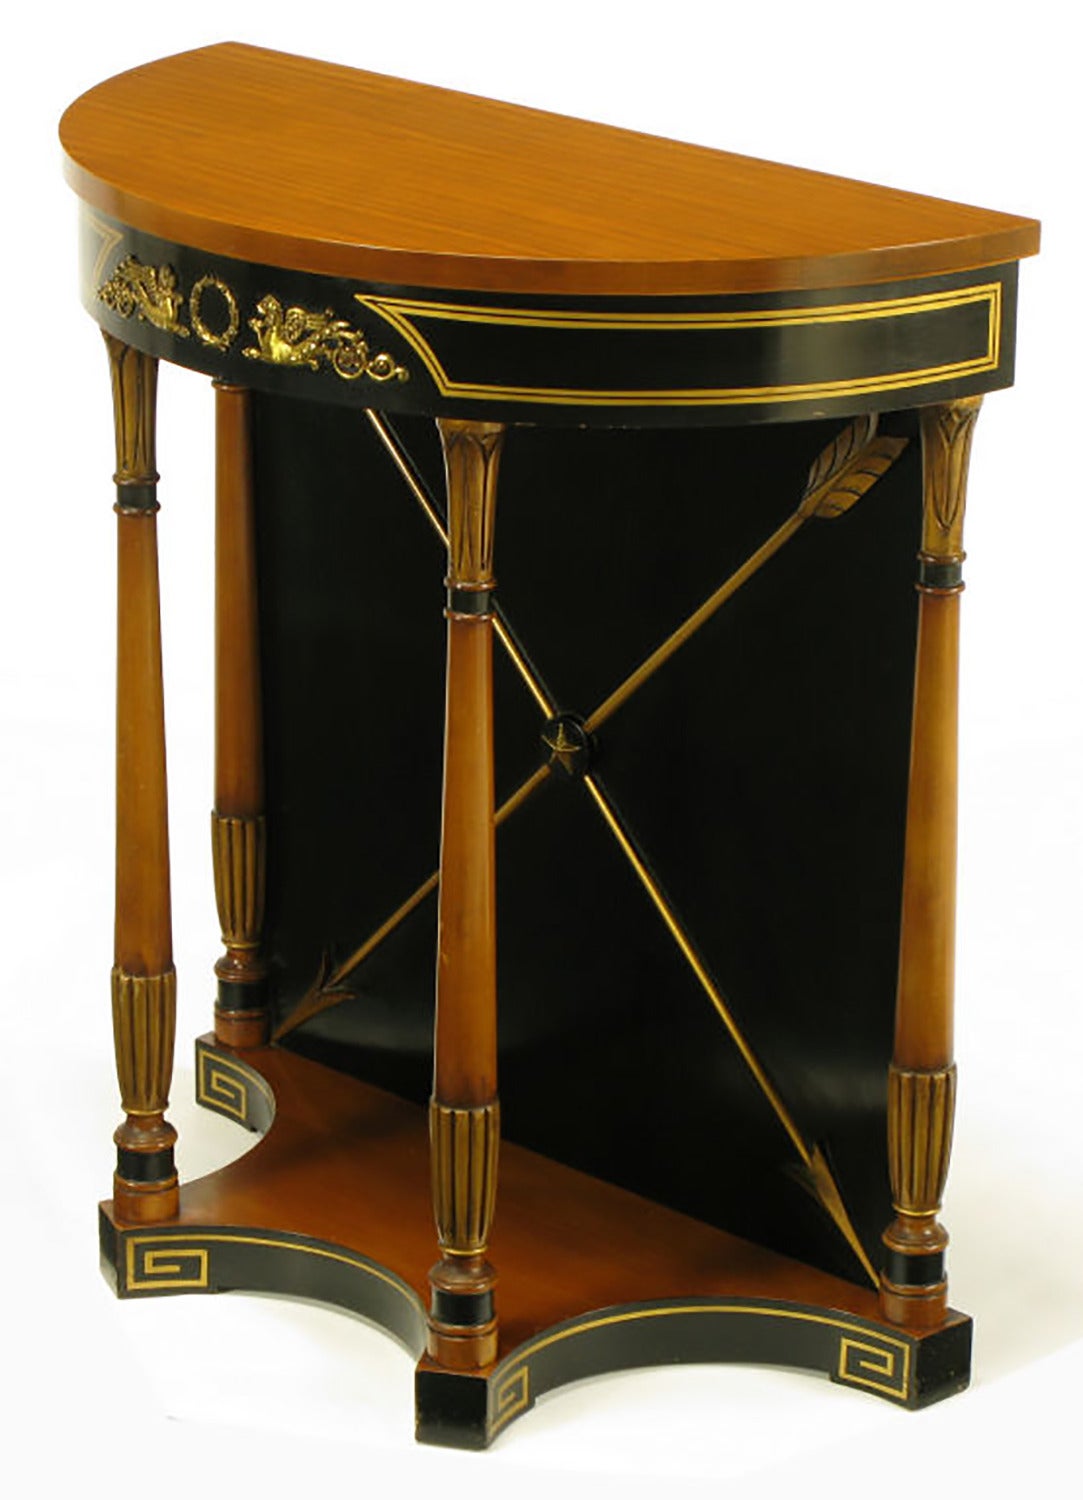 American Parcel-Gilt and Black Empire Demilune Console Table with Crossed Brass Arrows